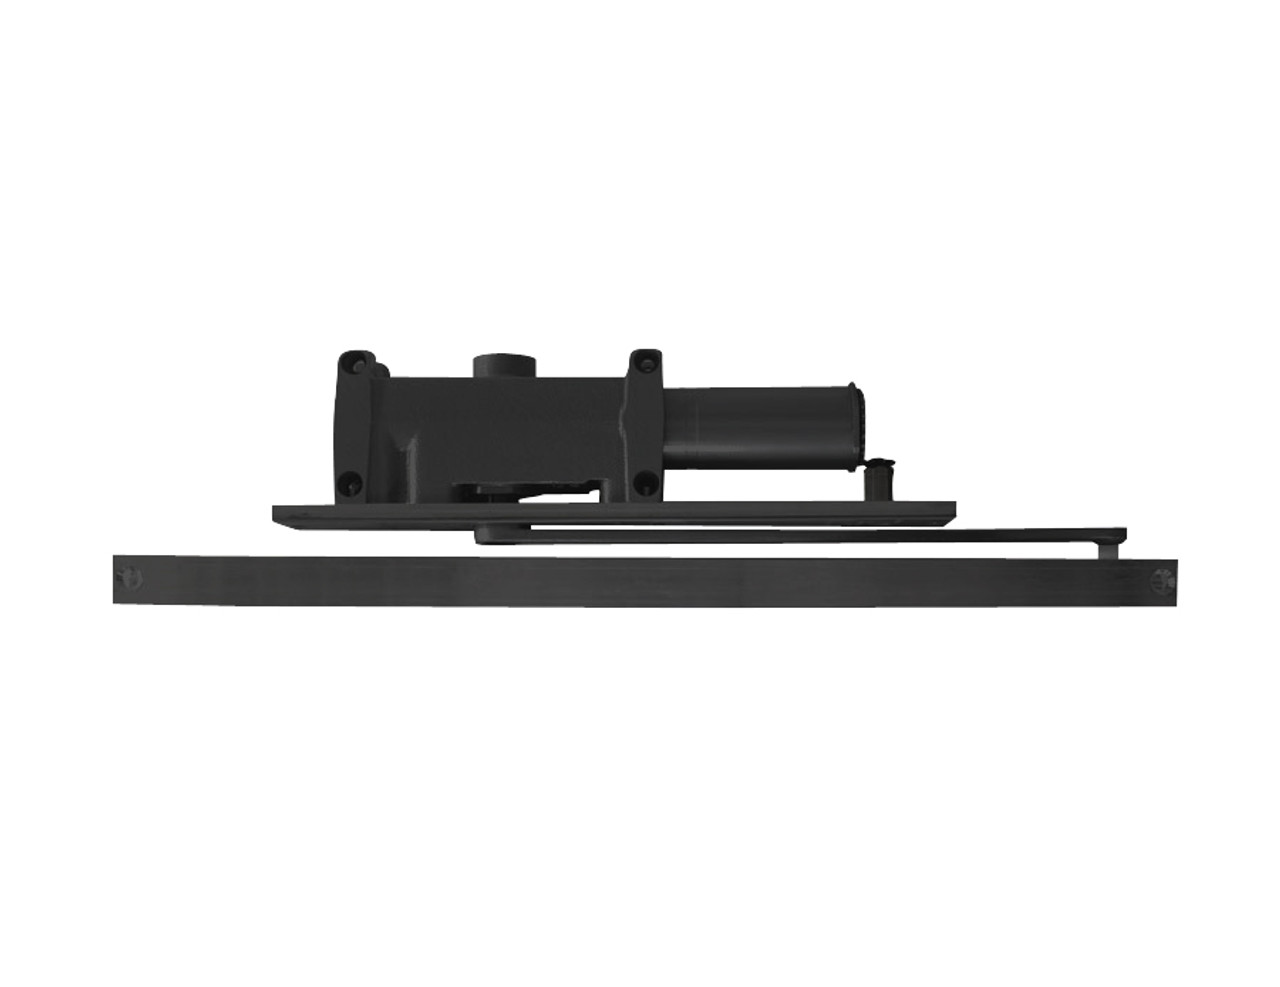 2014-H-RH-BLACK LCN Door Closer with Hold Open Arm in Black Finish